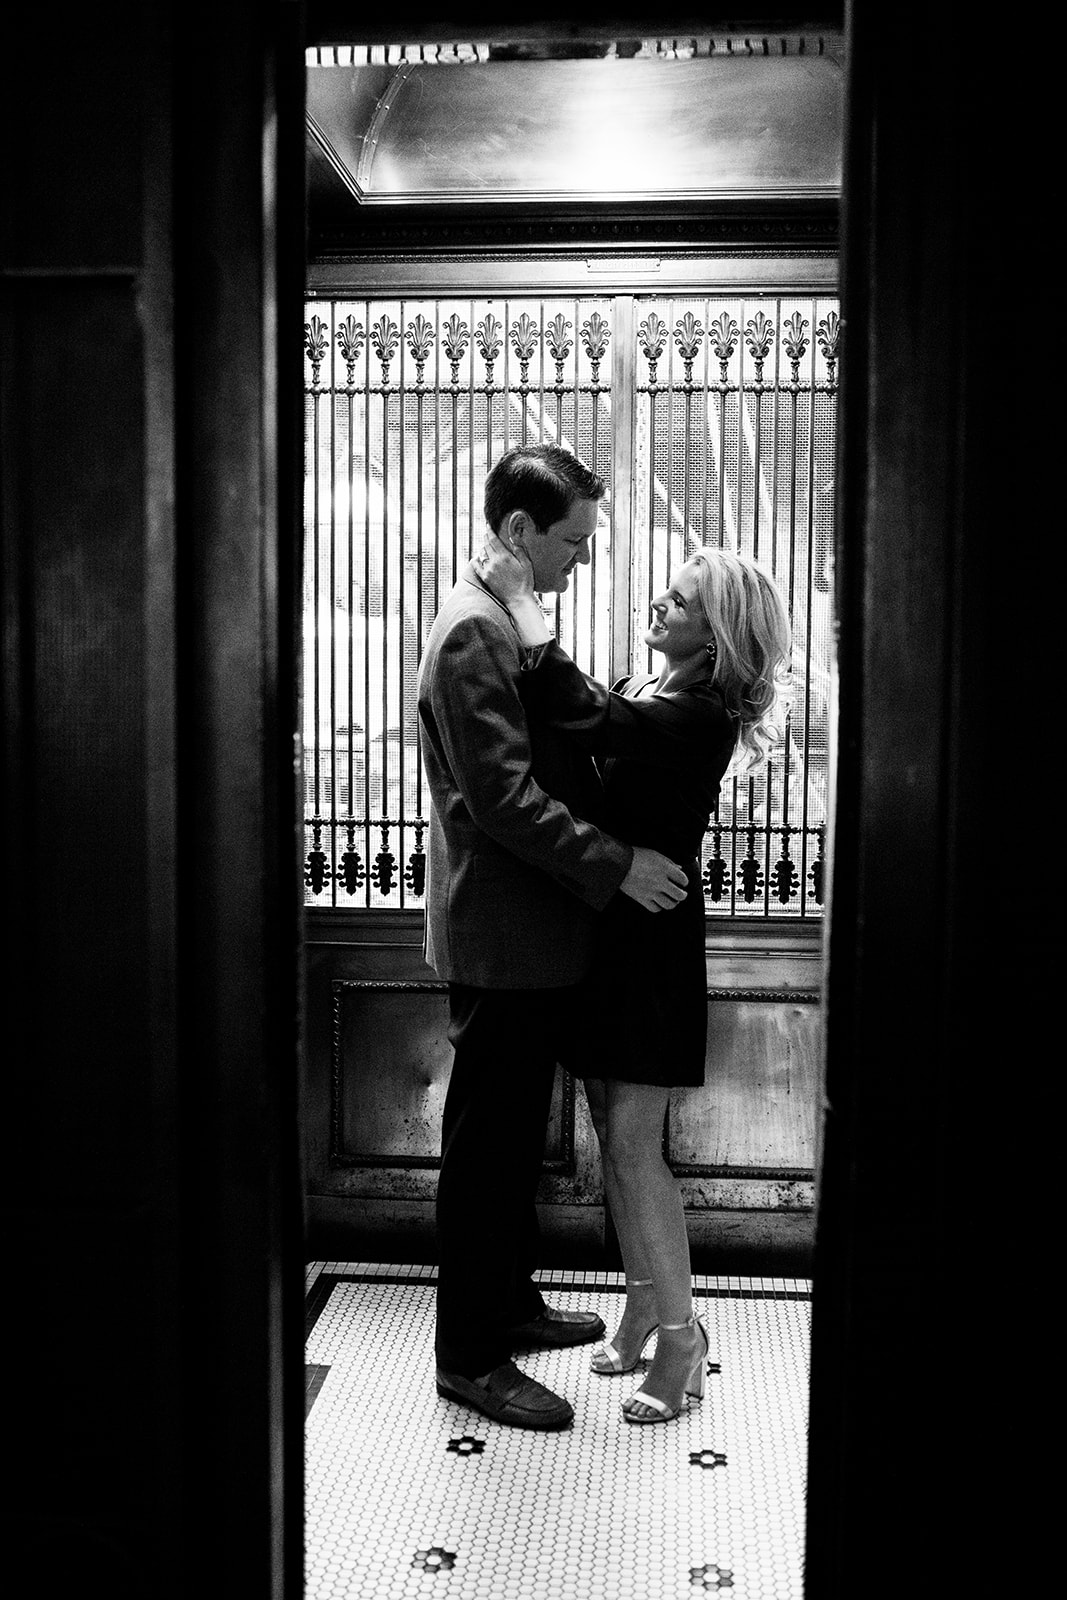 Michelle  Brendans Tobacco Company and Monument Ave Engagement Shoot - Image Property of www.j-dphoto.com